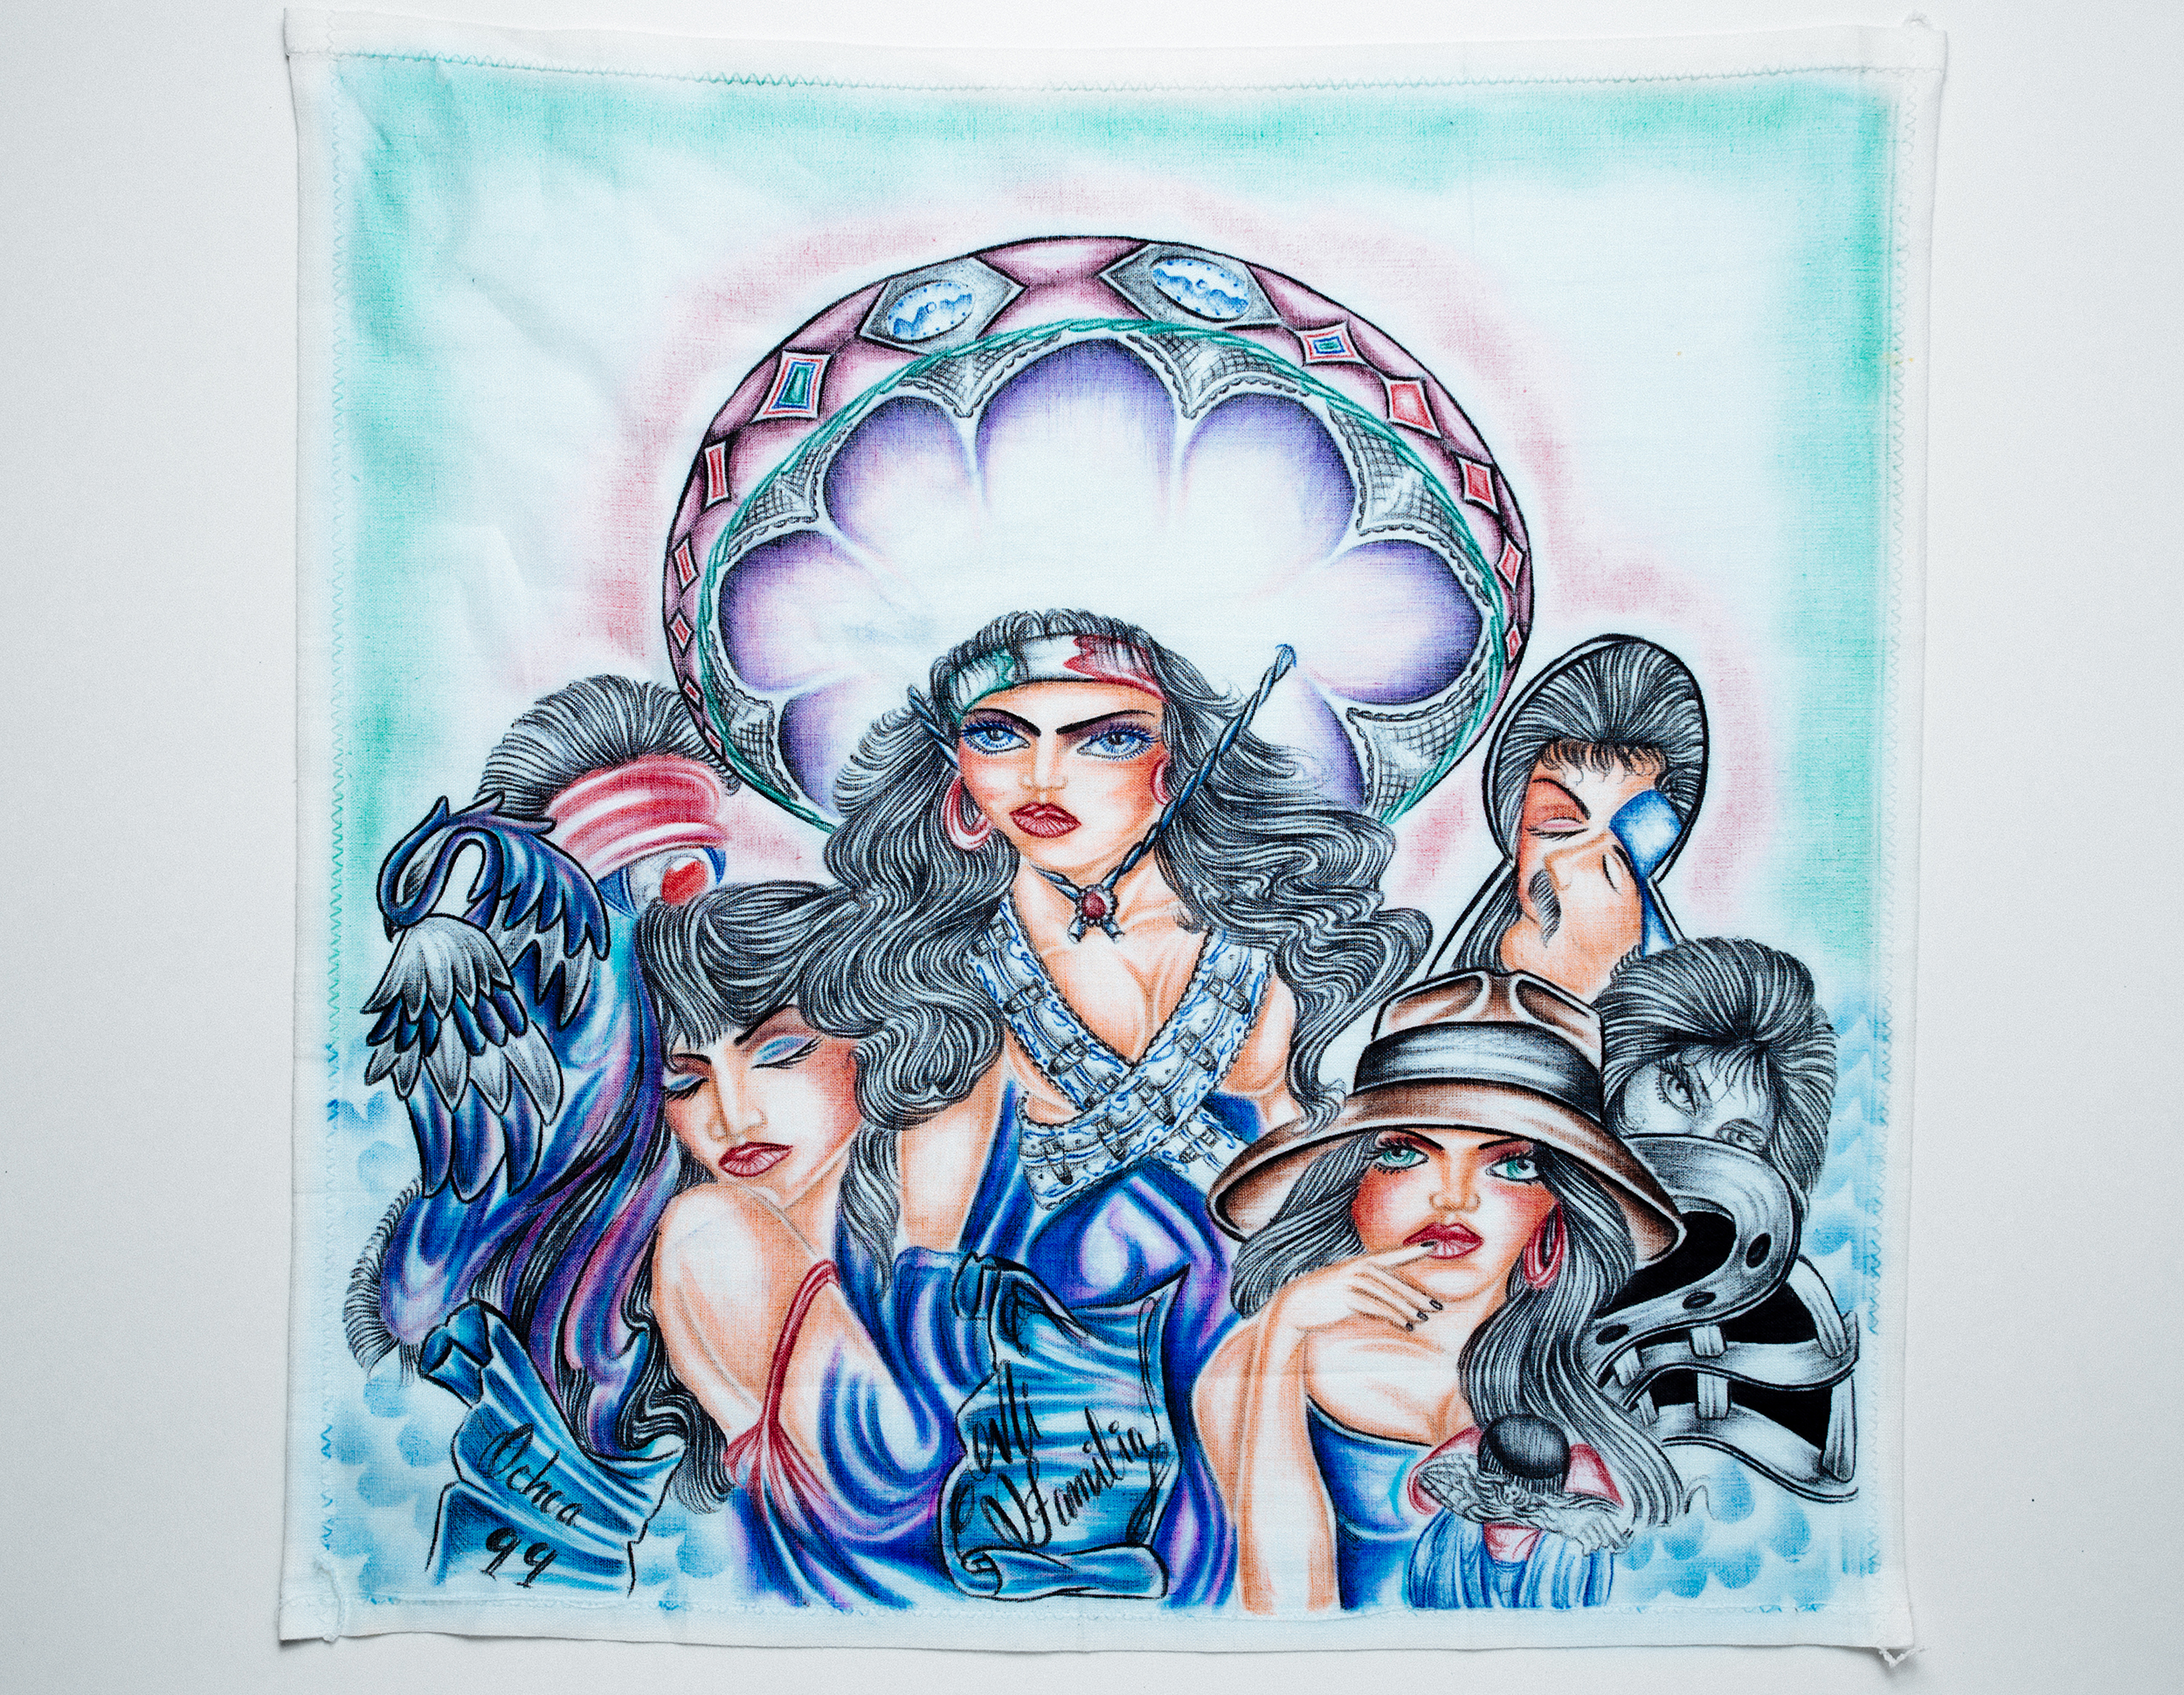 A Paño in blue, purple, and red or three women. 